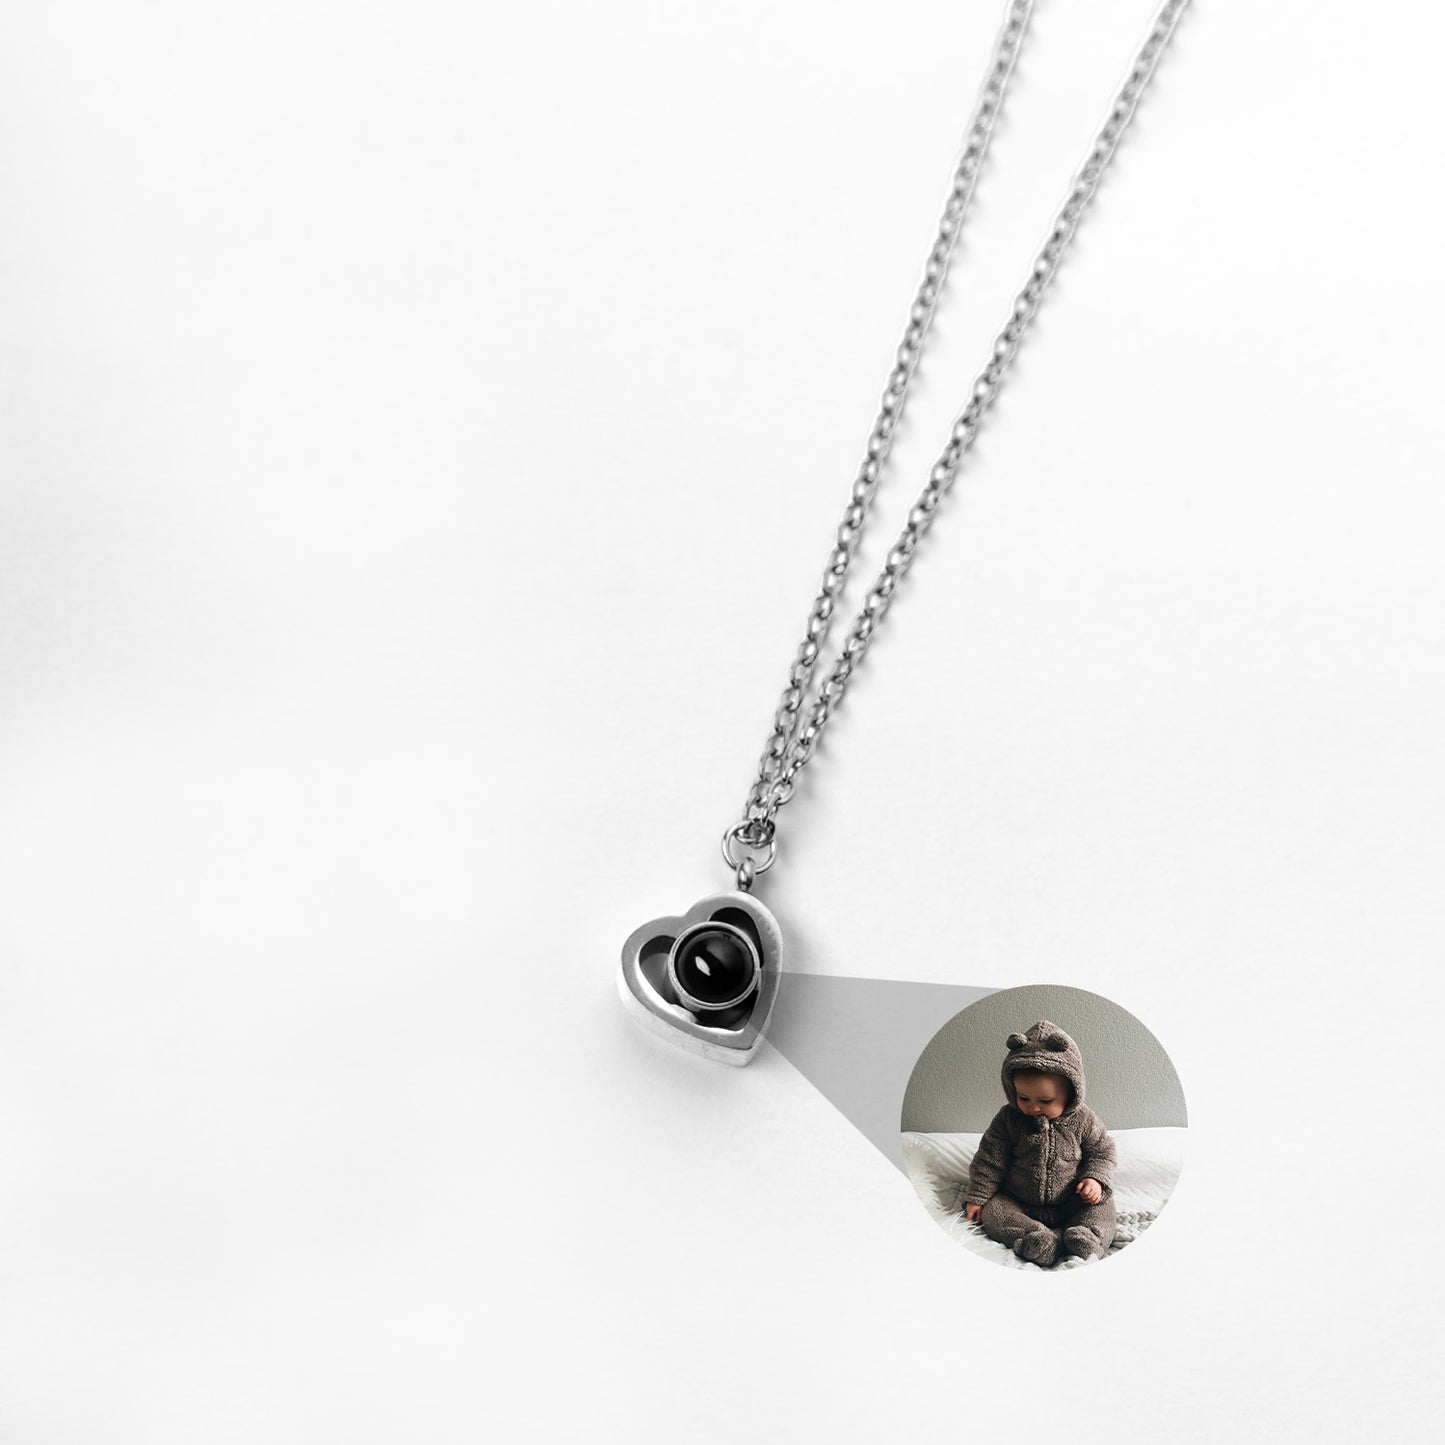 Personalized heart shaped photo necklace